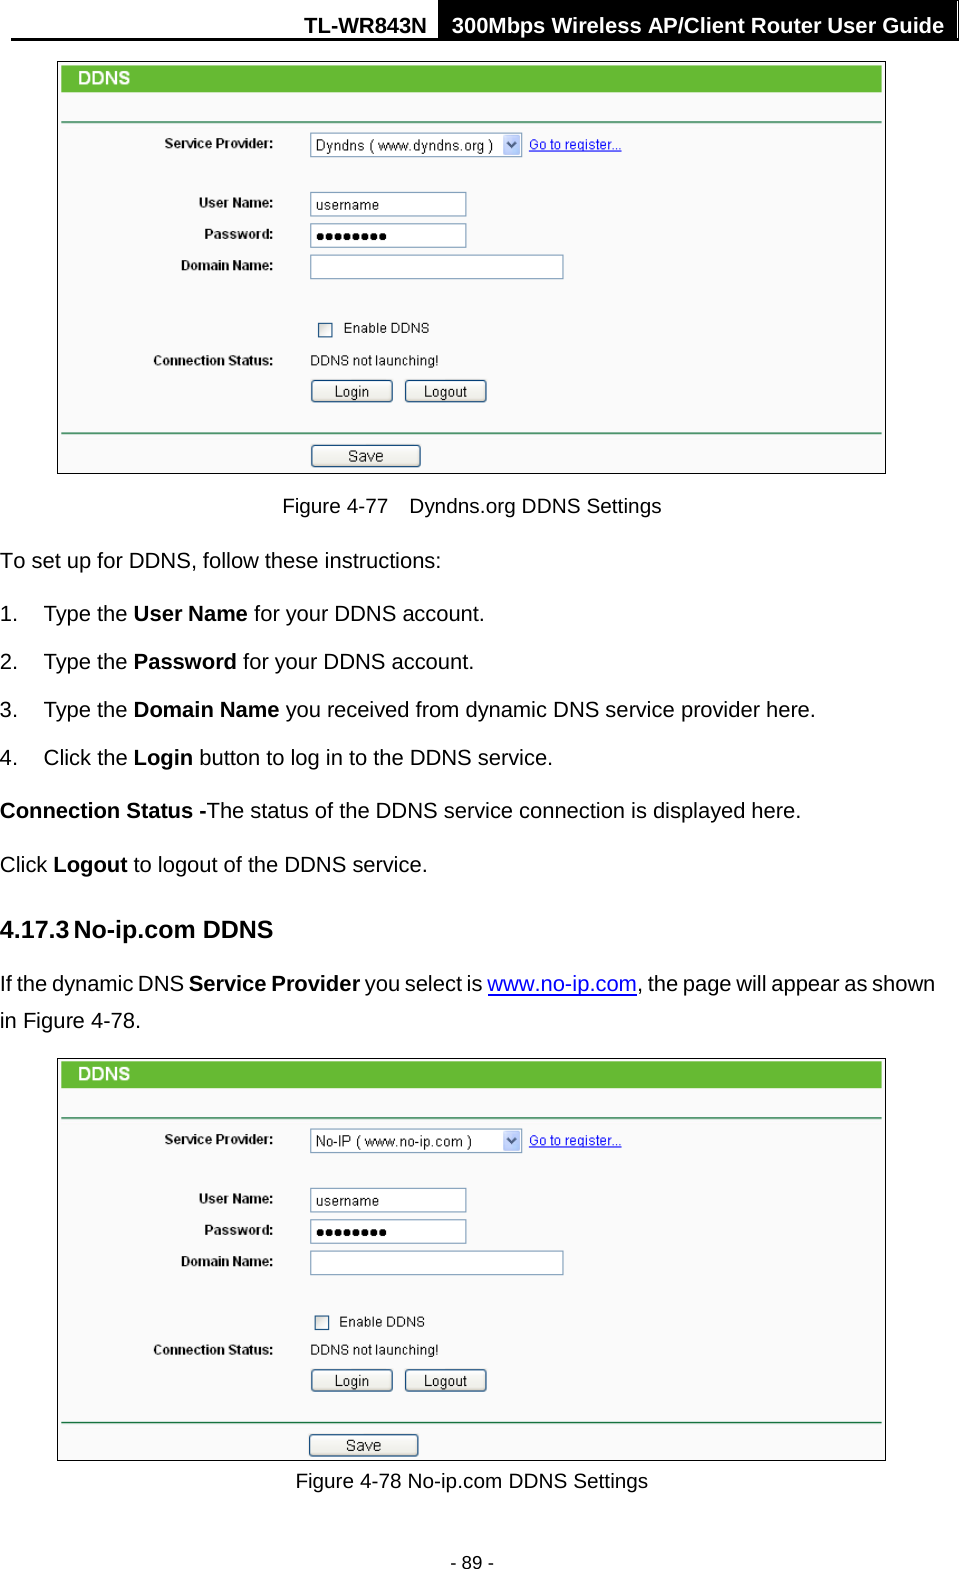 TL-WR843N 300Mbps Wireless AP/Client Router User Guide - 89 - Figure 4-77  Dyndns.org DDNS Settings To set up for DDNS, follow these instructions: 1. Type the User Name for your DDNS account.2. Type the Password for your DDNS account.3. Type the Domain Name you received from dynamic DNS service provider here.4. Click the Login button to log in to the DDNS service.Connection Status -The status of the DDNS service connection is displayed here. Click Logout to logout of the DDNS service.   4.17.3 No-ip.com DDNS If the dynamic DNS Service Provider you select is www.no-ip.com, the page will appear as shown in Figure 4-78. Figure 4-78 No-ip.com DDNS Settings 